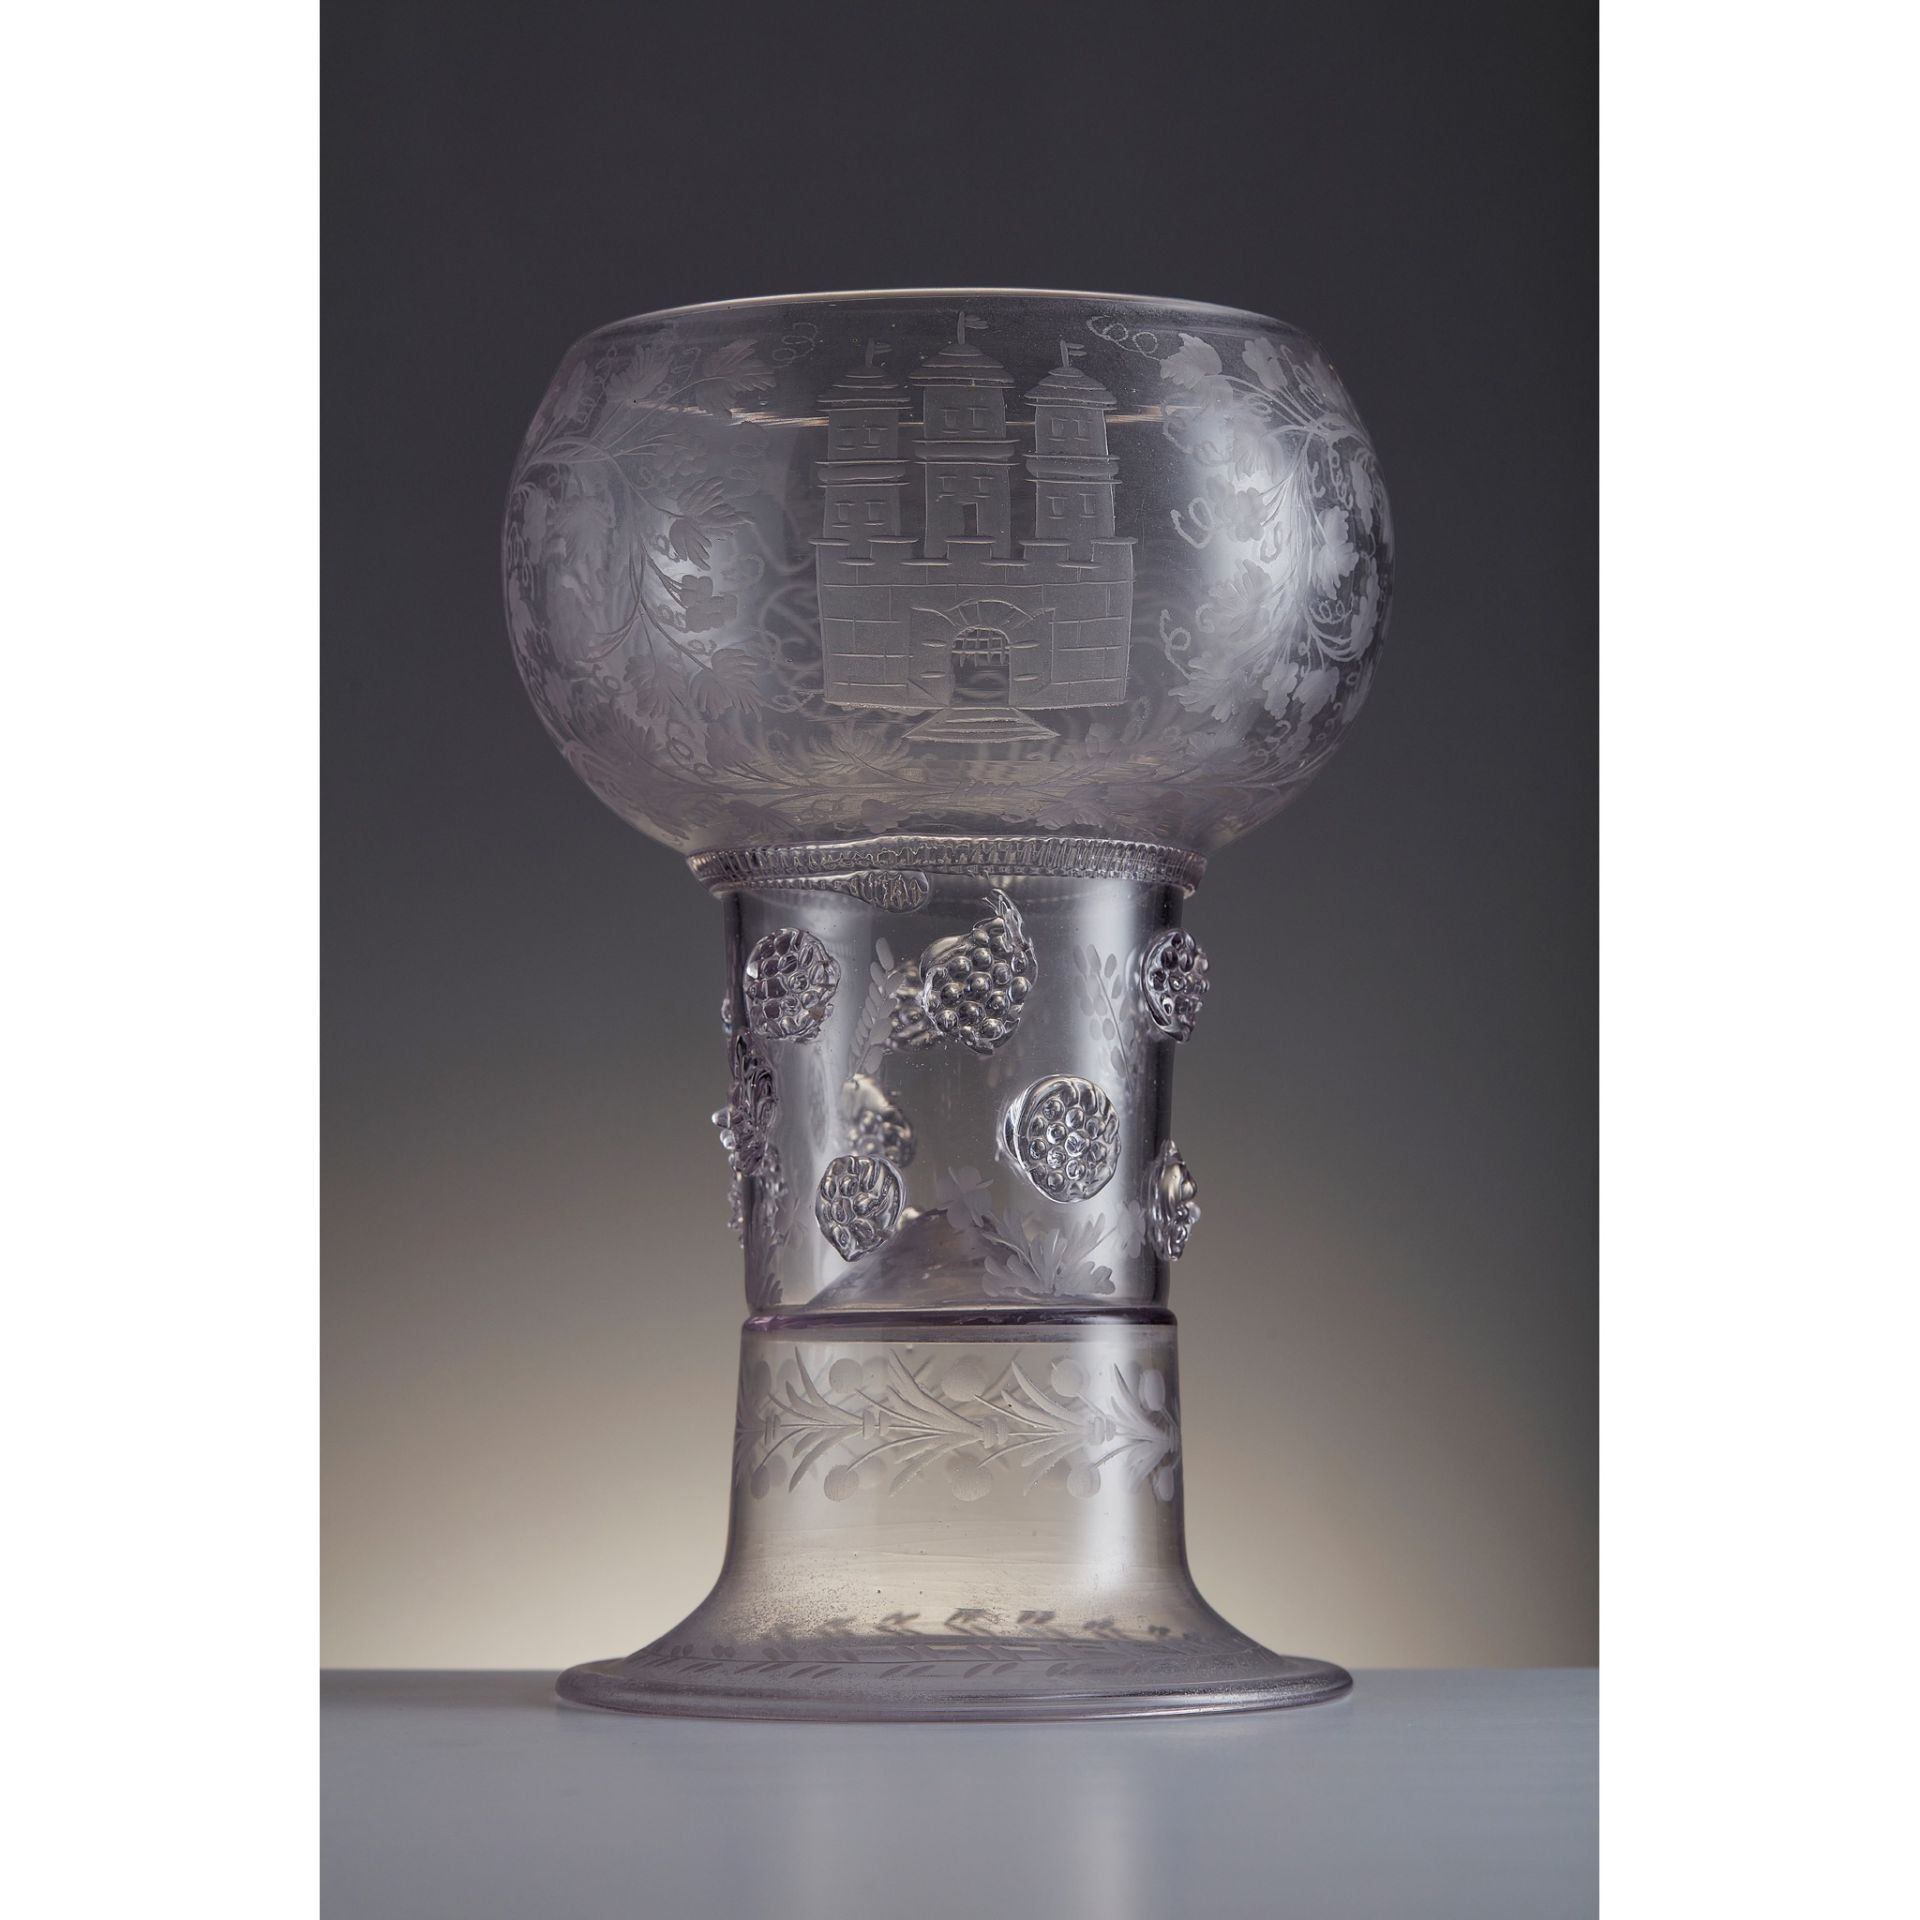 LARGE CLEAR GLASS ROEMER BEARING THE BREADALBANE CYPHER DUTCH OR GERMAN, LATE 17TH / EARLY 18TH - Bild 4 aus 4